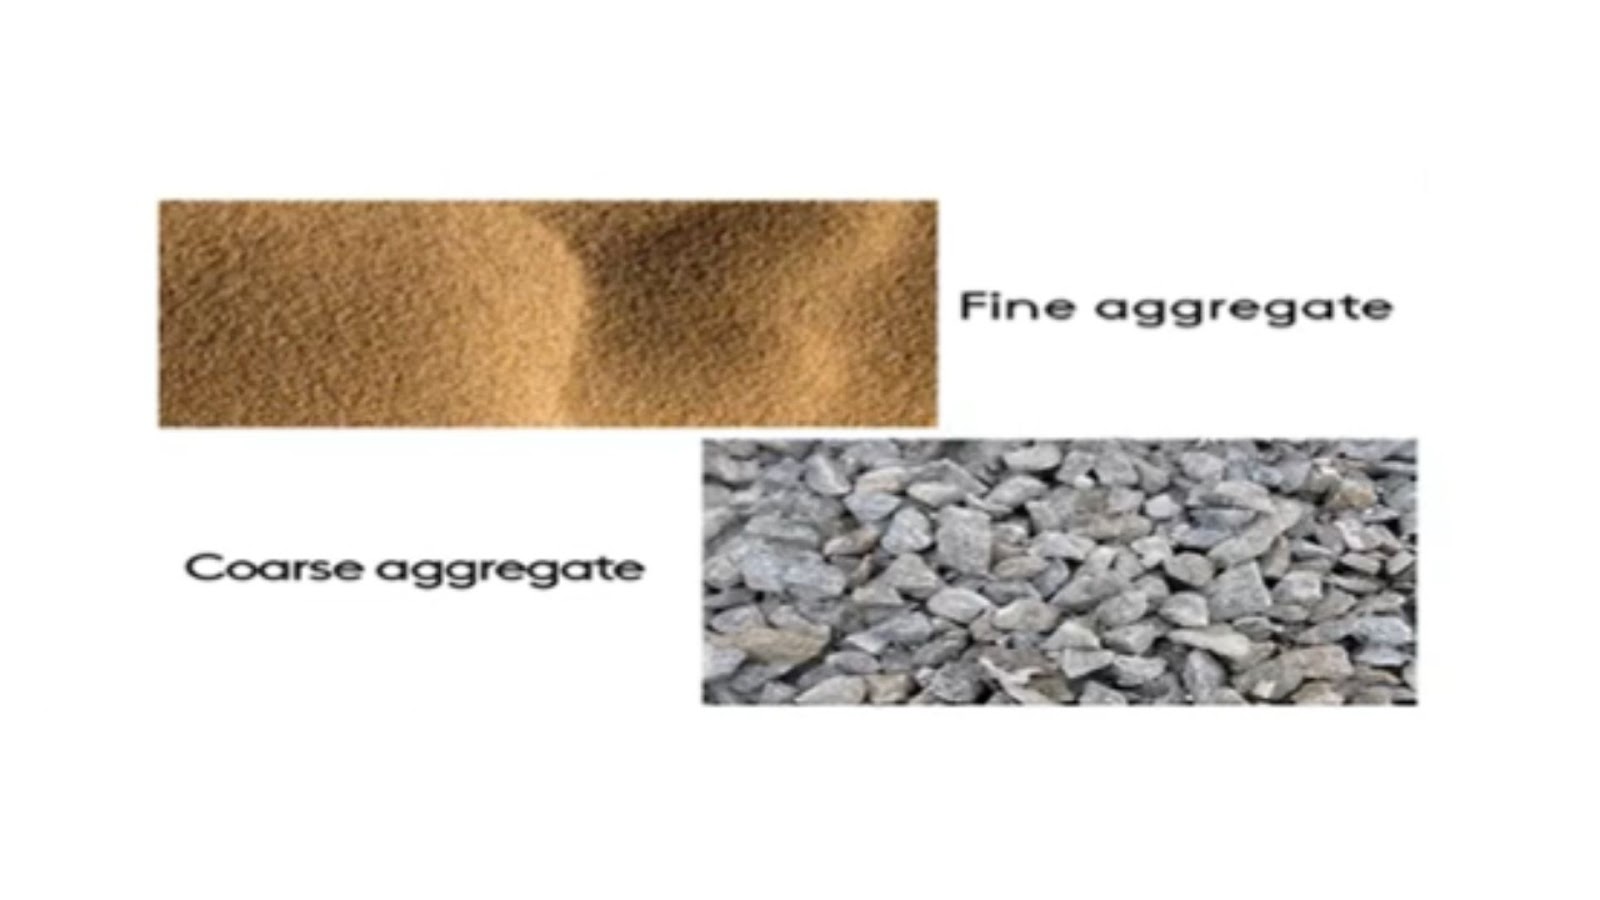 According to size of aggregates